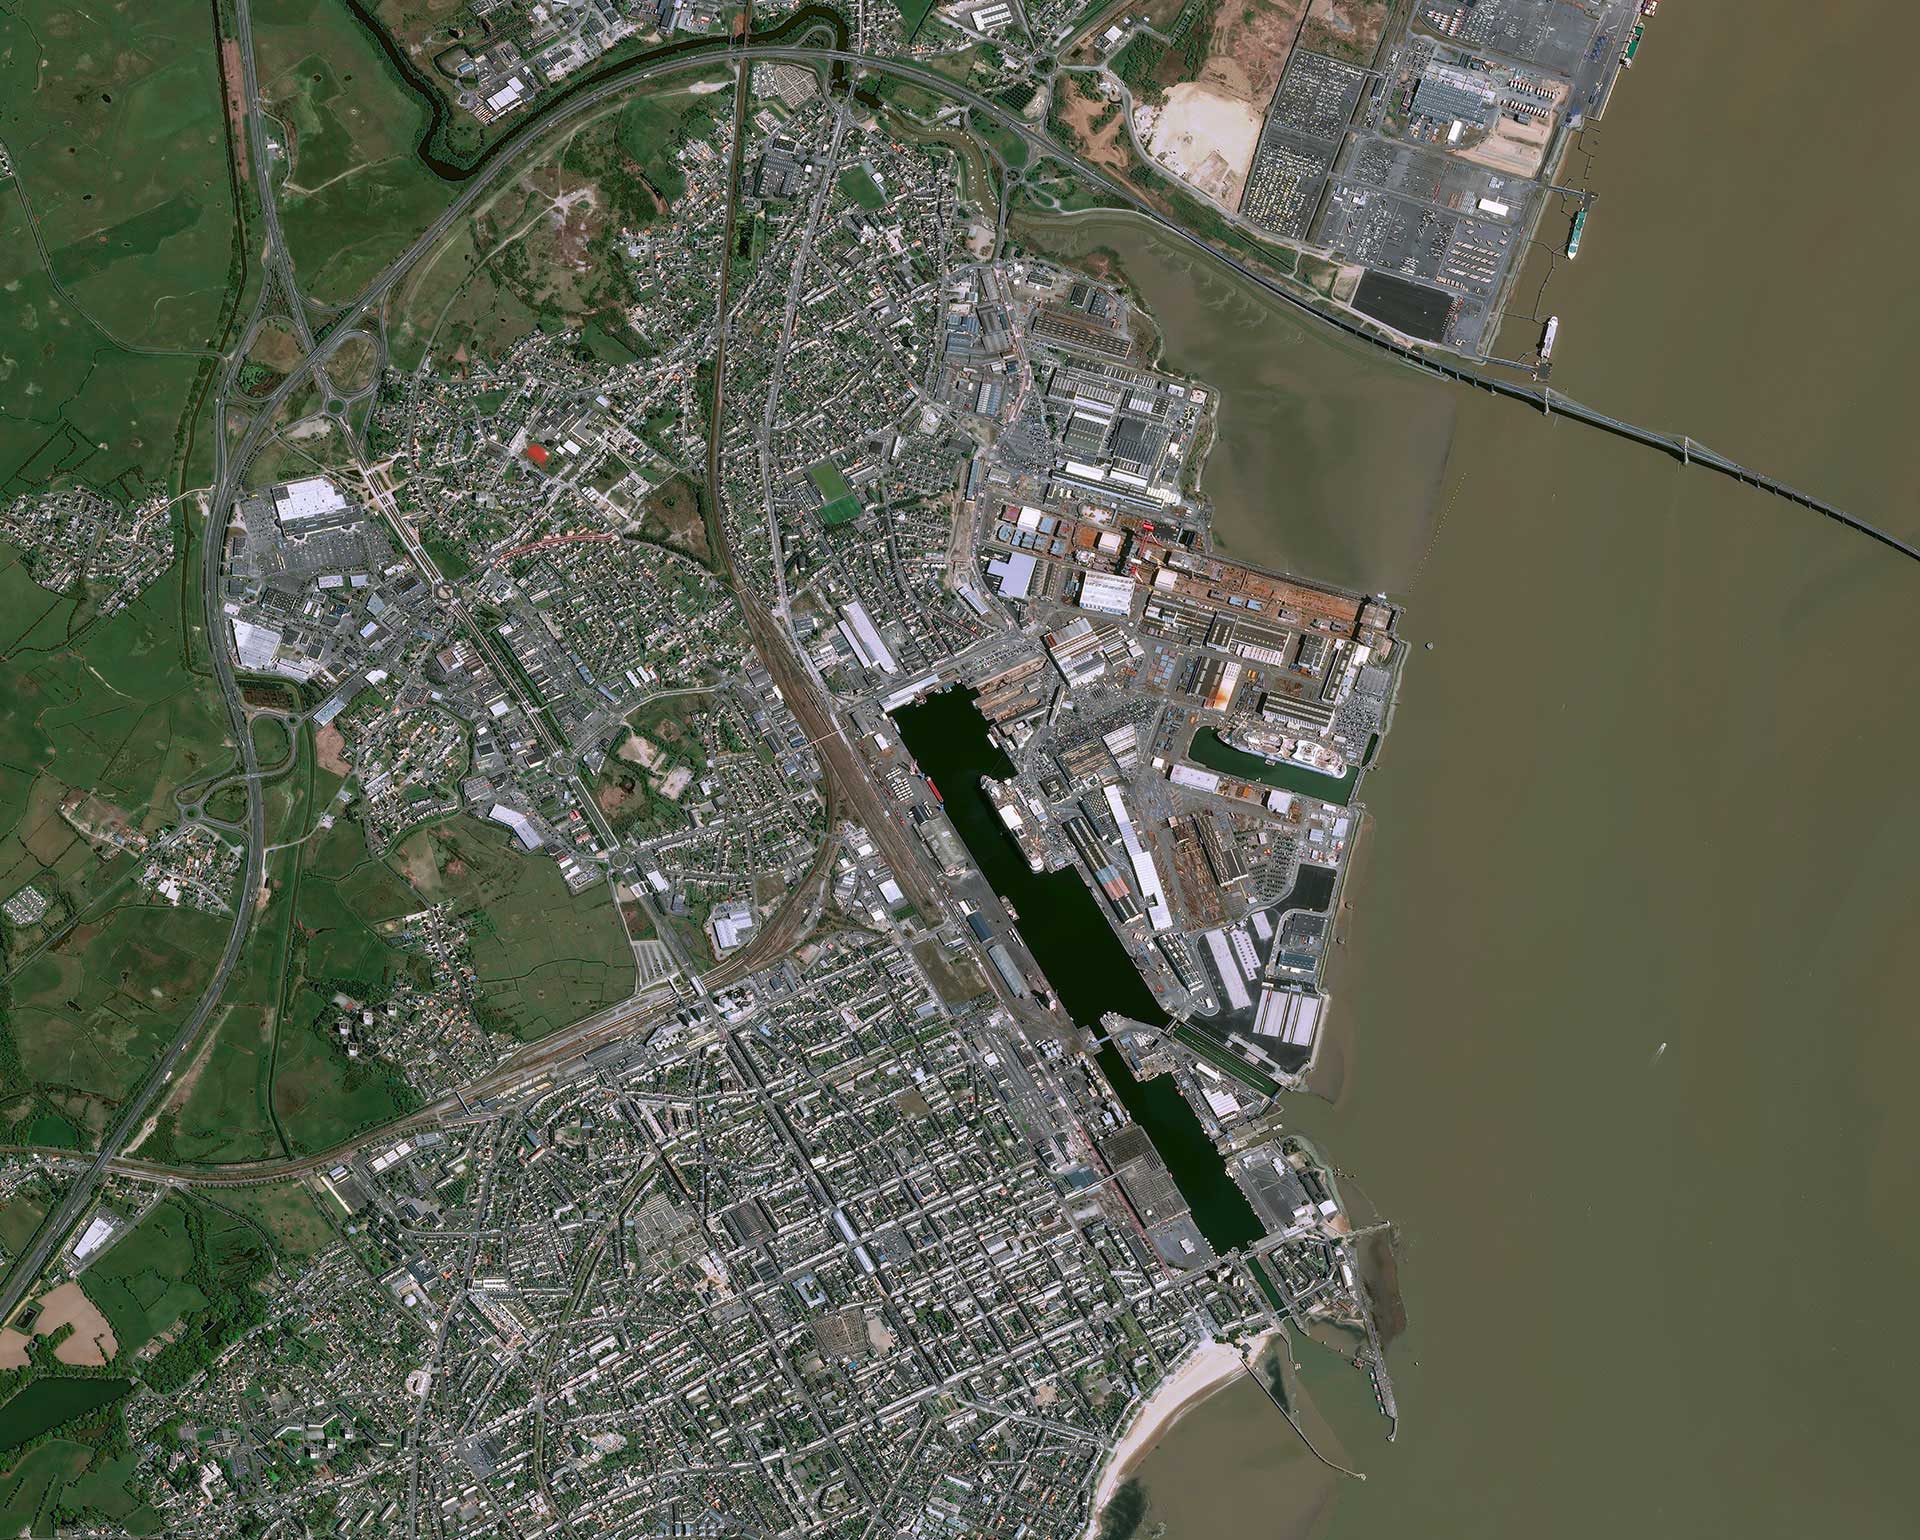 Port of Saint Nazaire as seen by the Pleiades satellite. Because of certain sensitive activities, particularly energy-related, port areas are subject to special surveillance by INERIS.